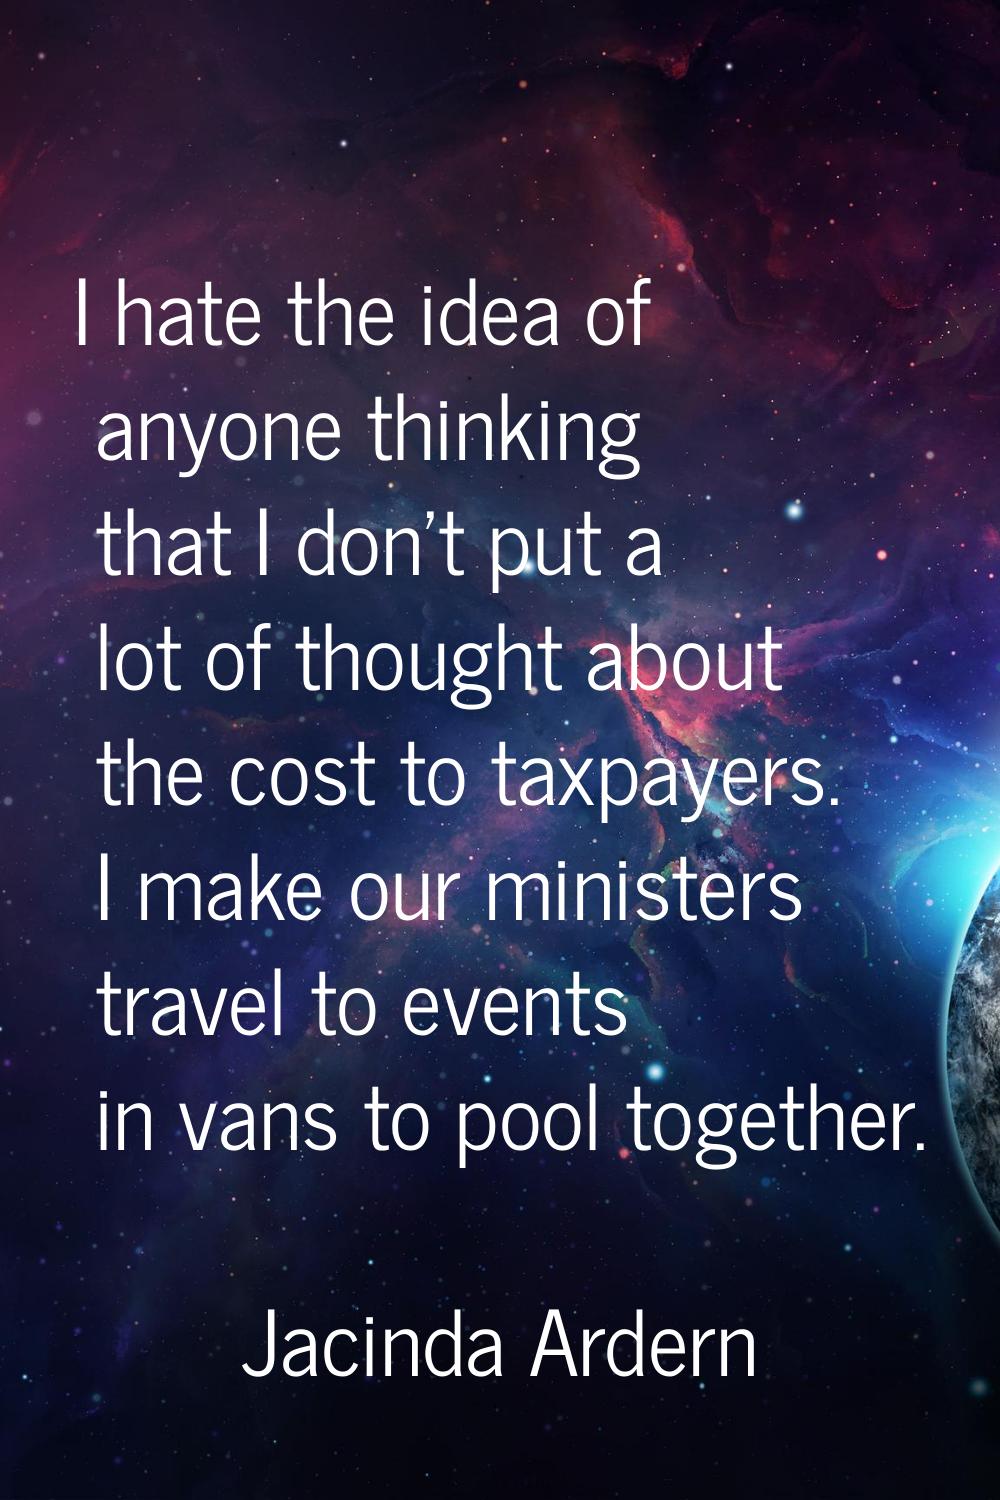 I hate the idea of anyone thinking that I don't put a lot of thought about the cost to taxpayers. I